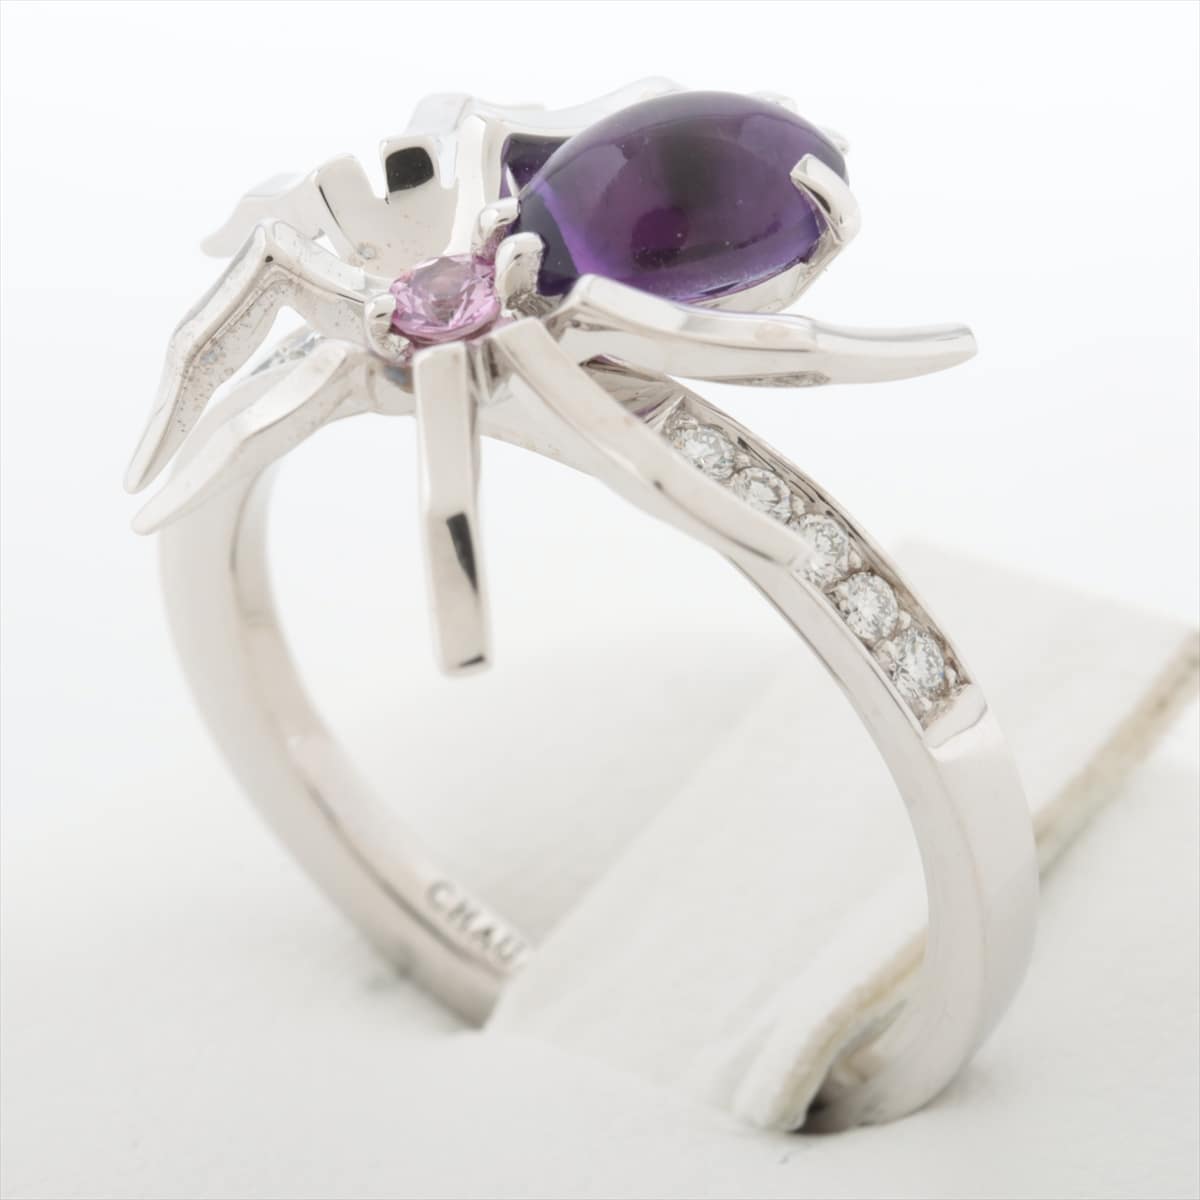 Chaumet Attrape-moi spiders Amethyst Pink sapphire rings 750(WG) 5.2g 55